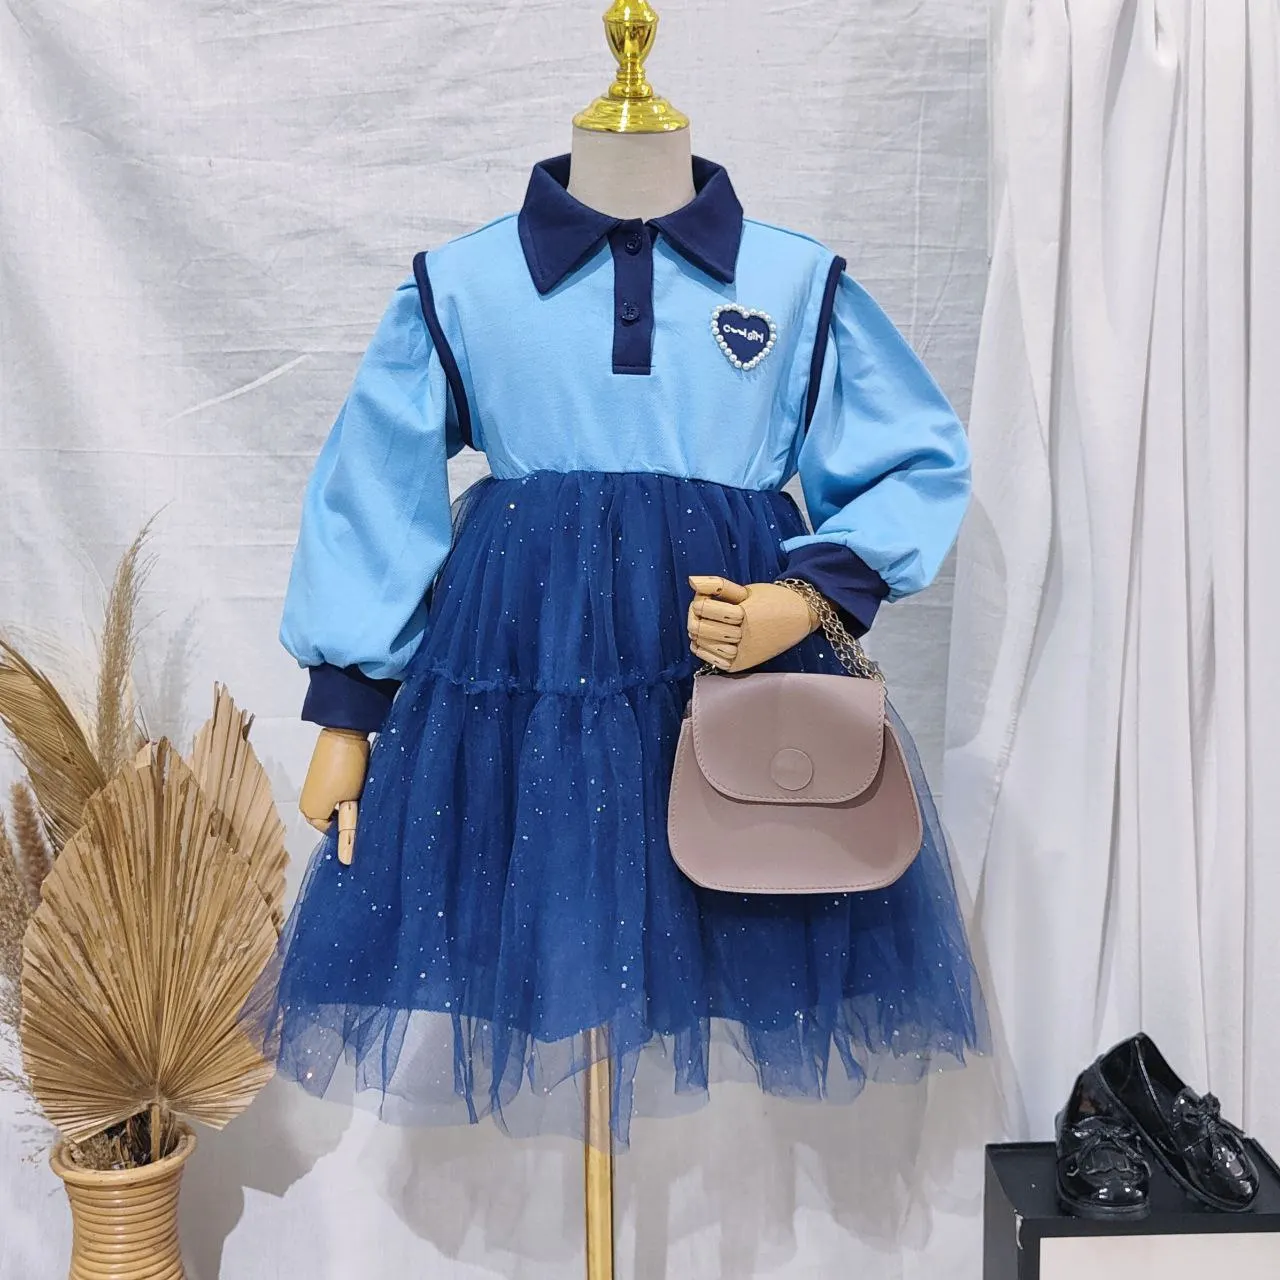 Children's new girls clothes with long sleeves for girls Fashion Beauty Dress for girls 4-5 years old Wholesale for Kids